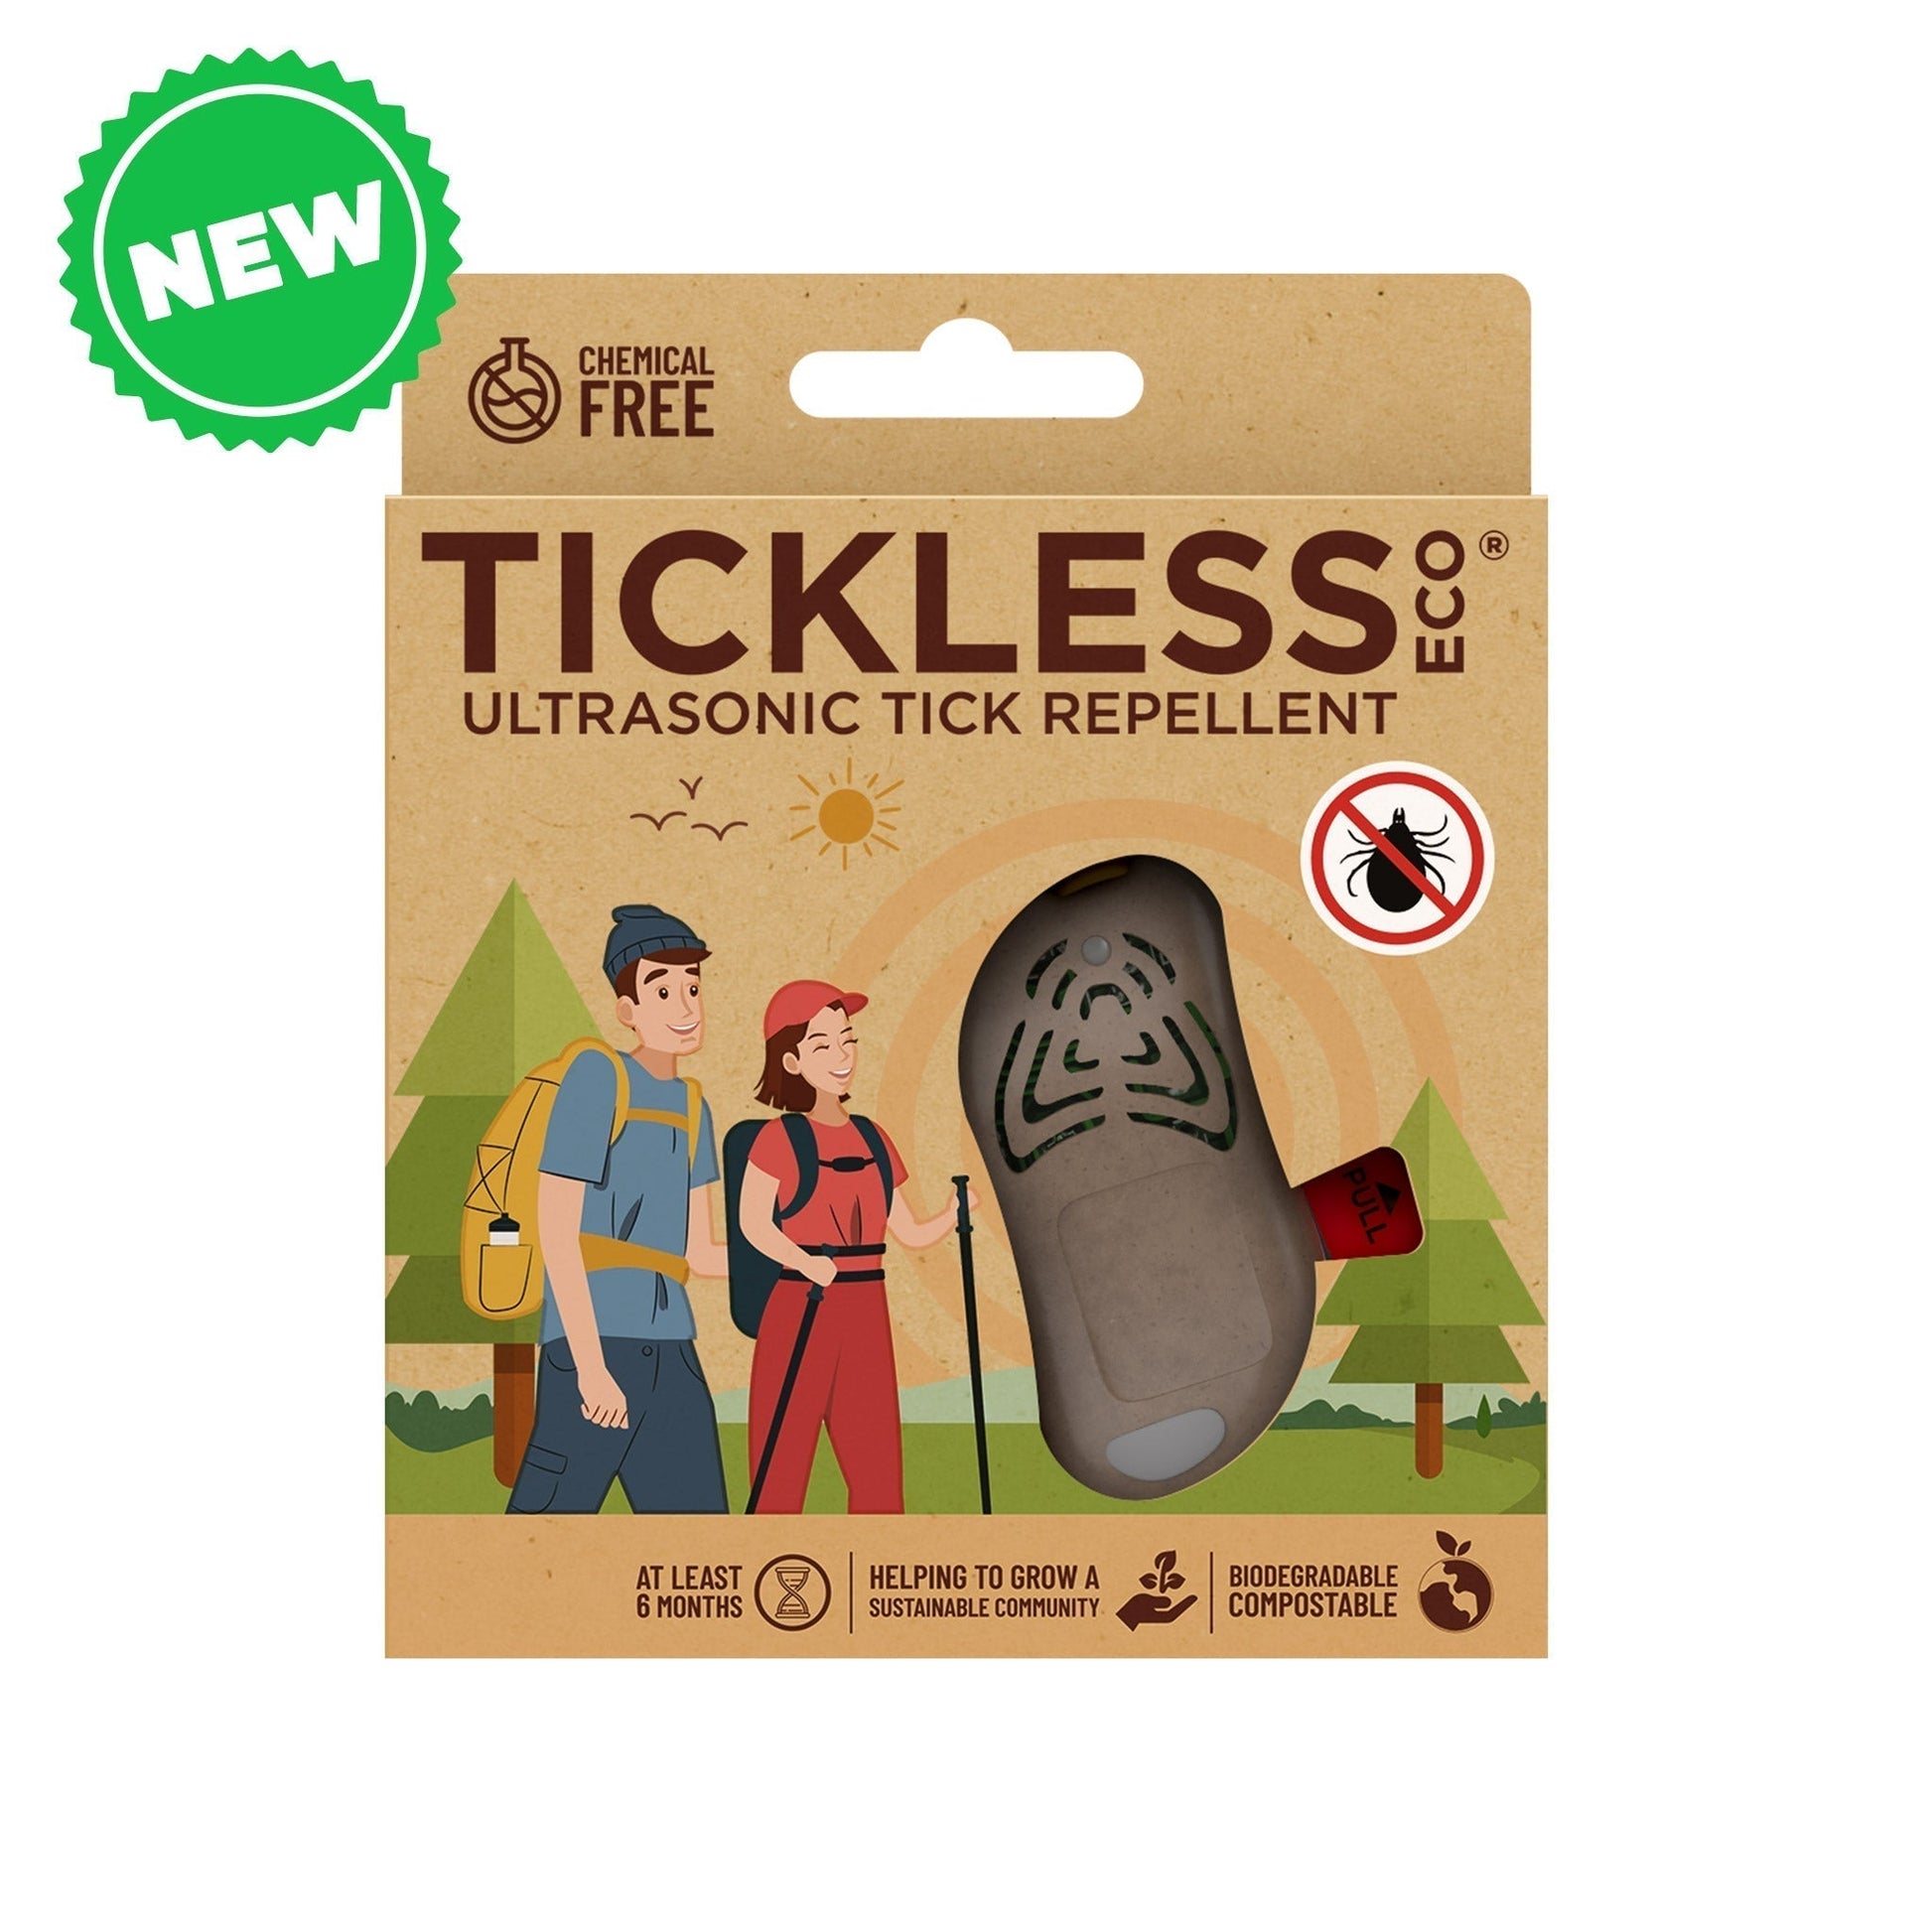 TicklessUSA Eco Brown Tickless Eco Chemical-Free Tick Repellent for Adults sonicguard SonicGuard sonicguardusa SonicGuardUSA tick repeller ultrasonic Tickless TicklessUSA tick and flea repellent safe